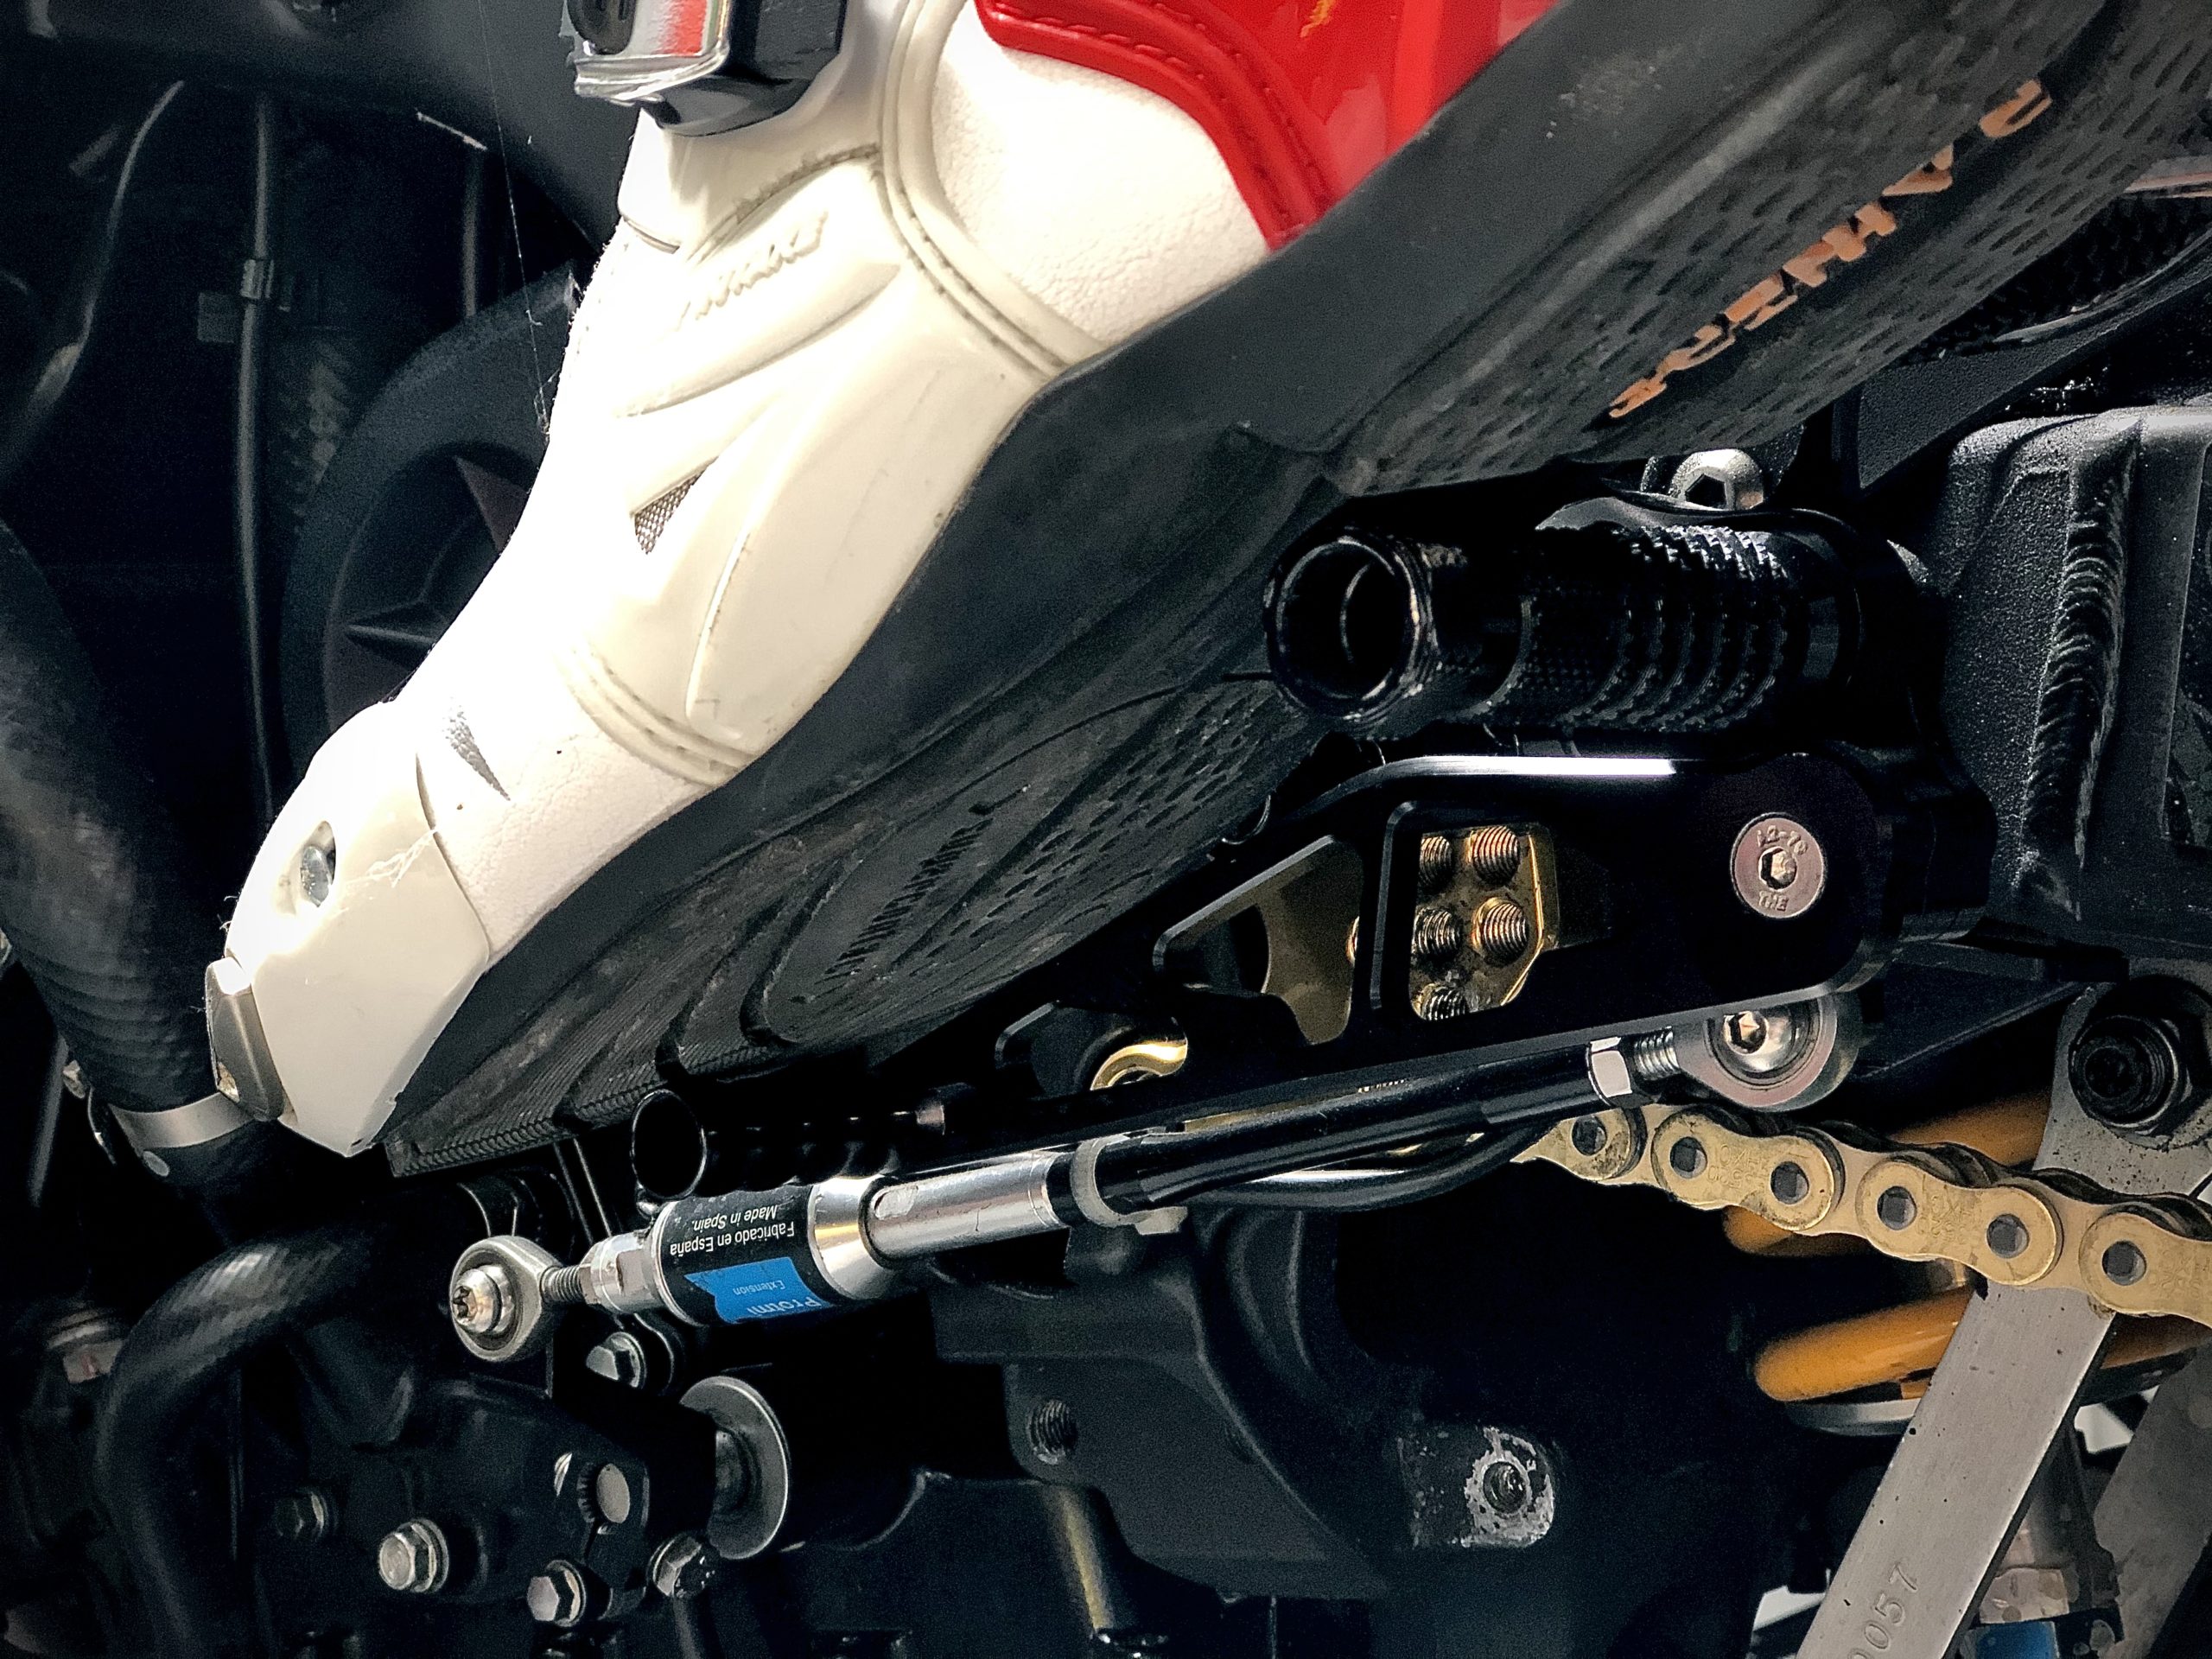 Lowering seat height - Motorcycle Integral Services